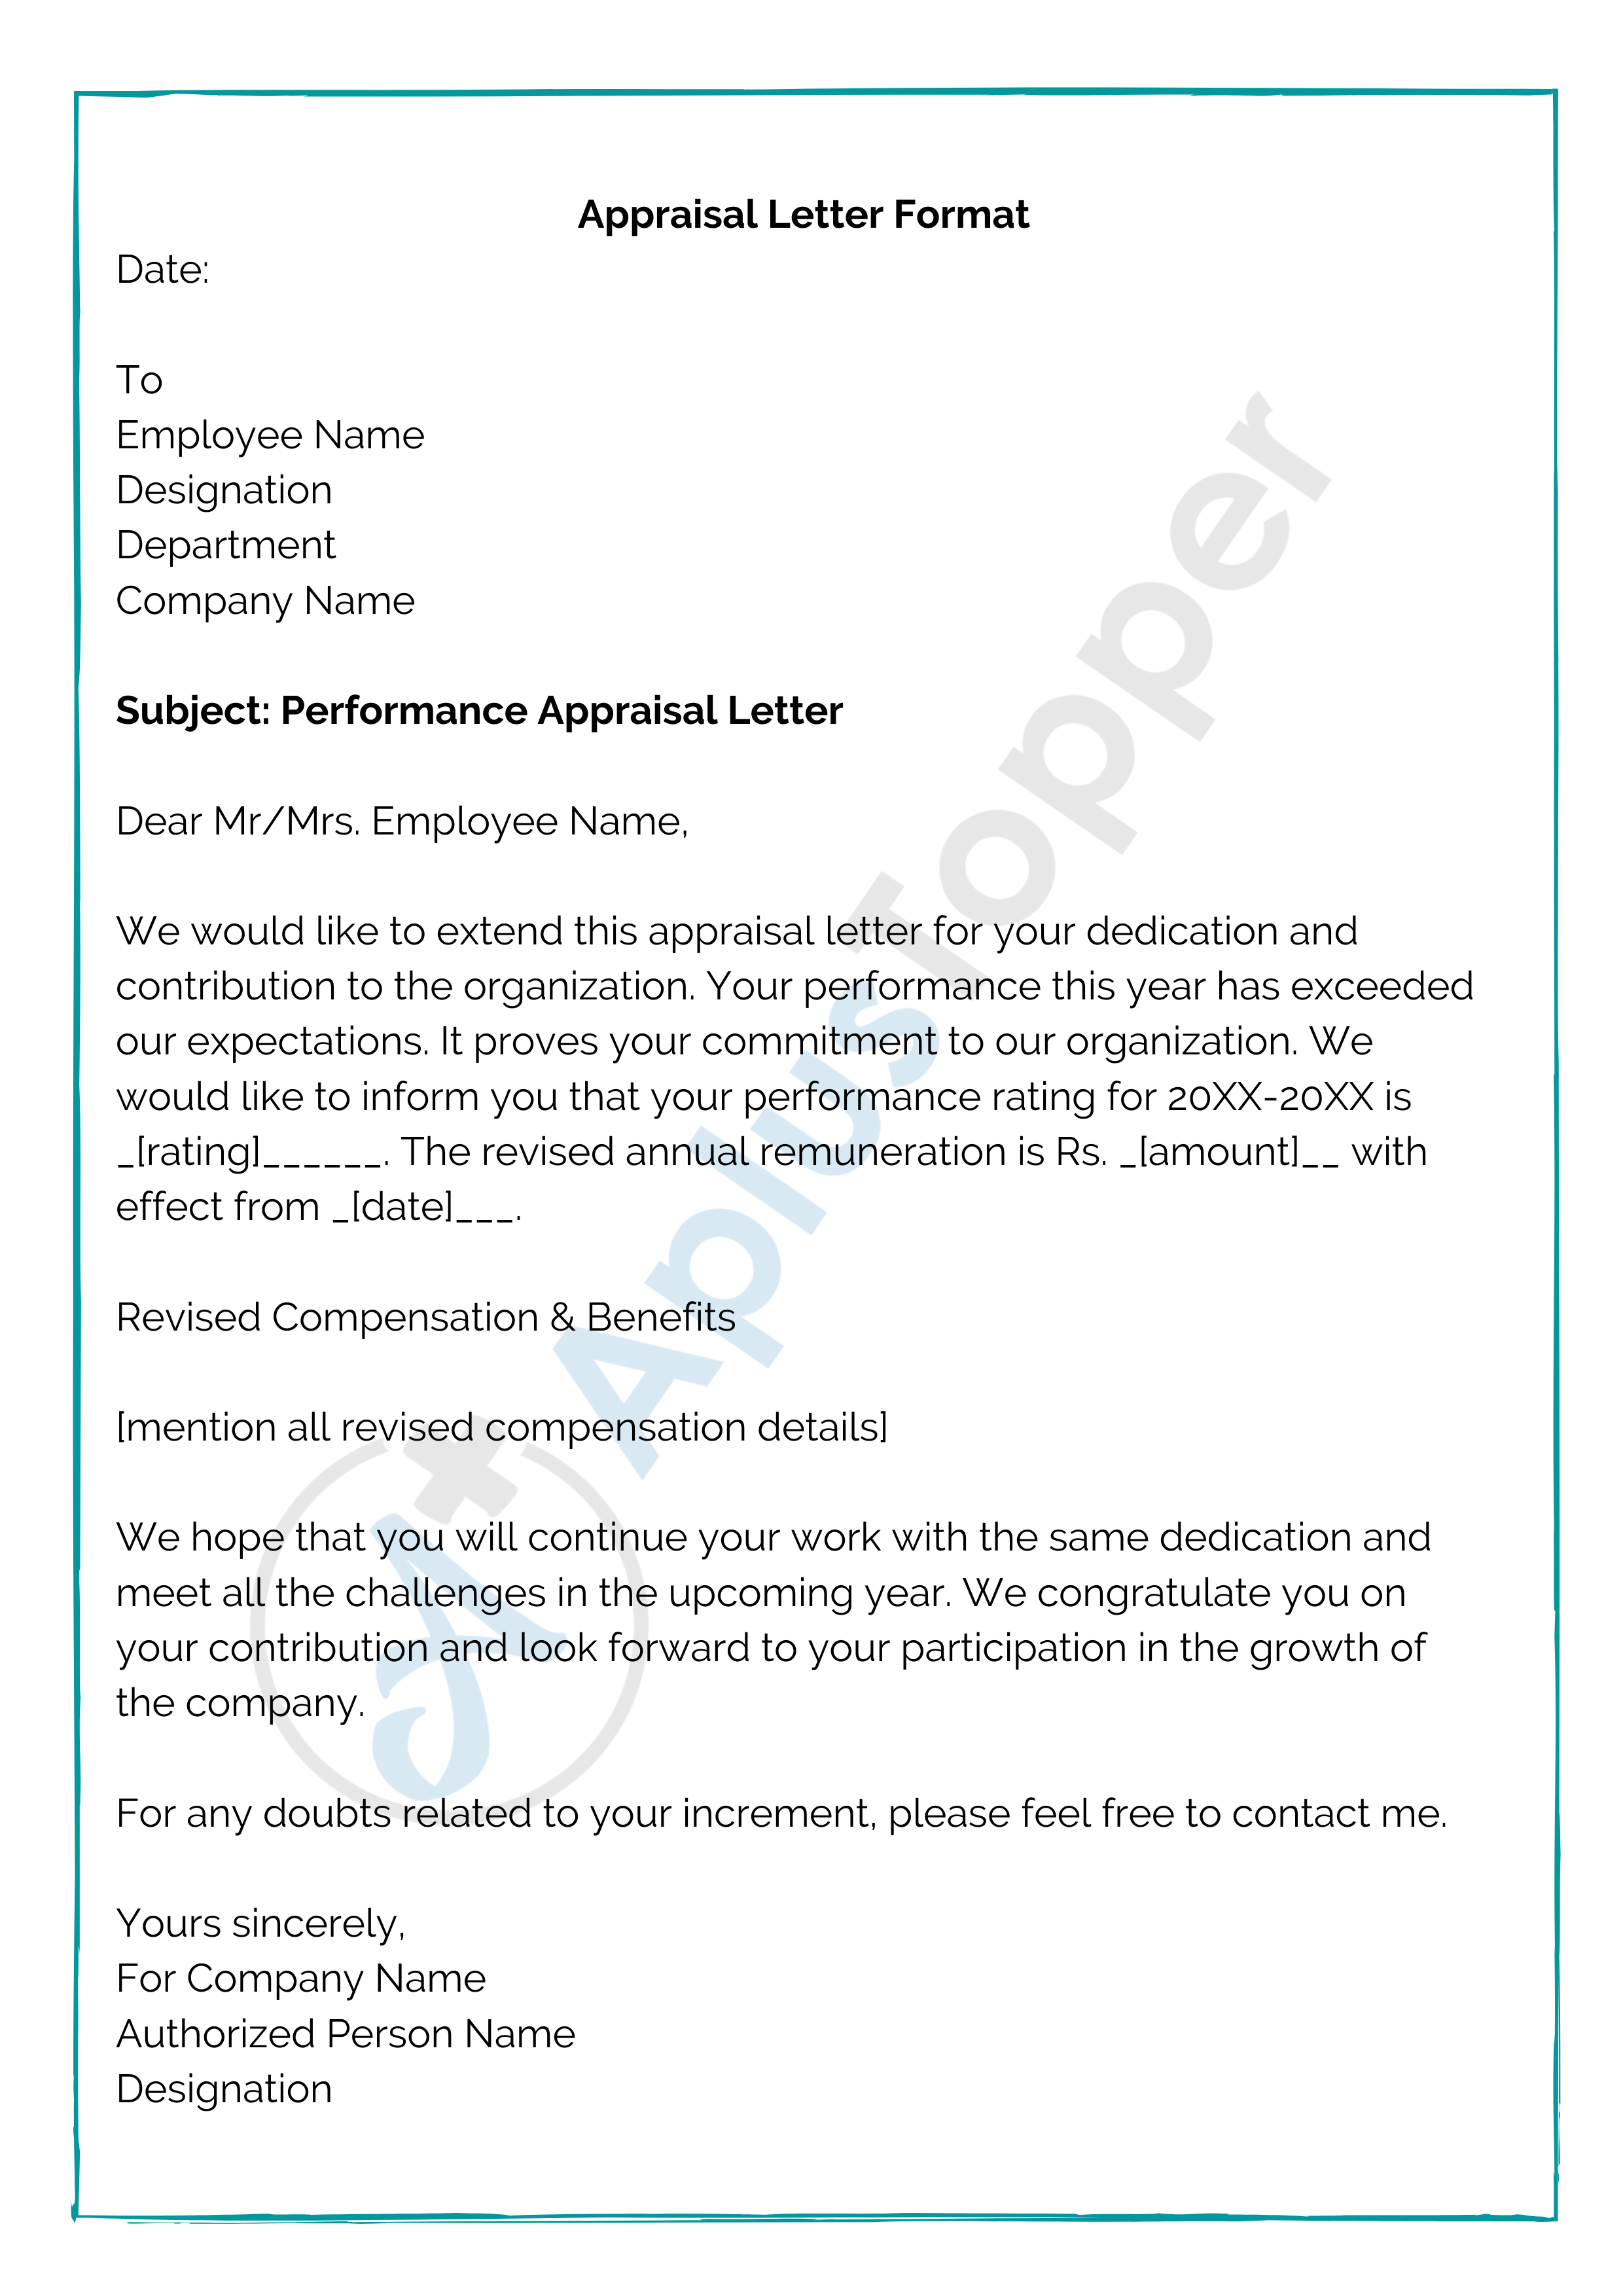 Appraisal Letter  Format, Samples, Examples, How To Write